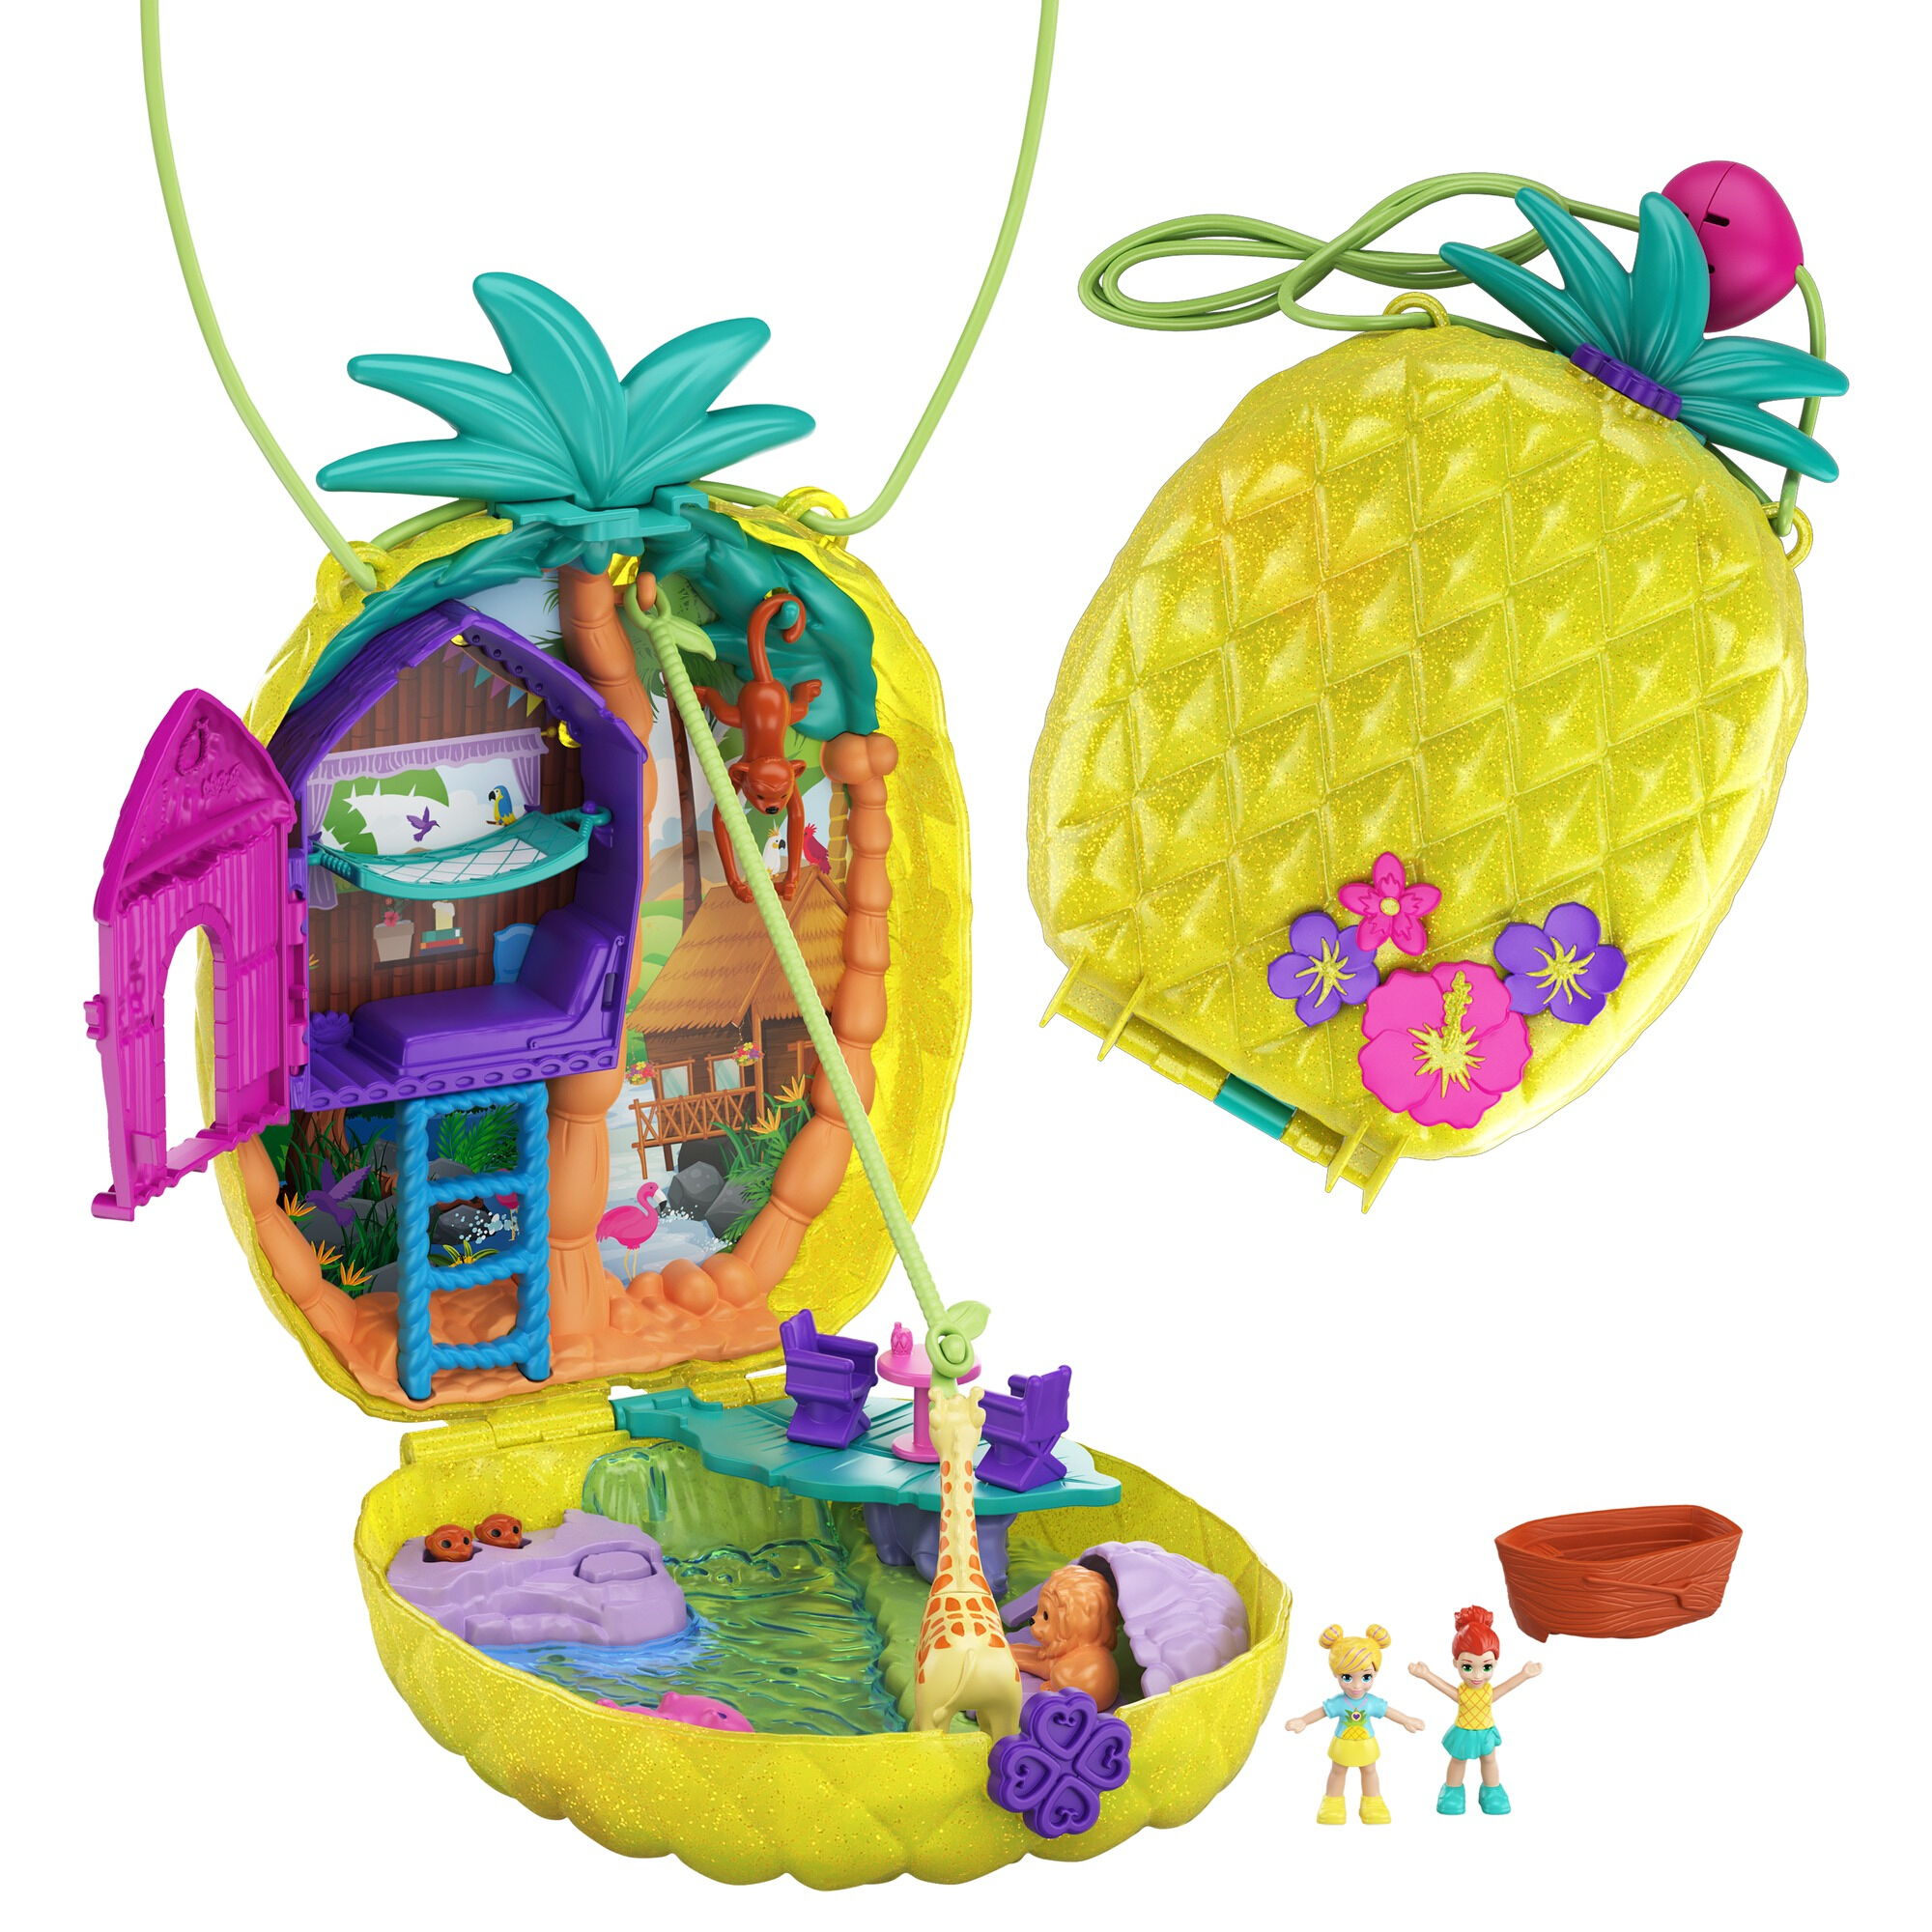 Polly Pocket 2-in-1 Pineapple Purse Playset with Micro Polly and Lila Dolls and Accessories - image 1 of 7